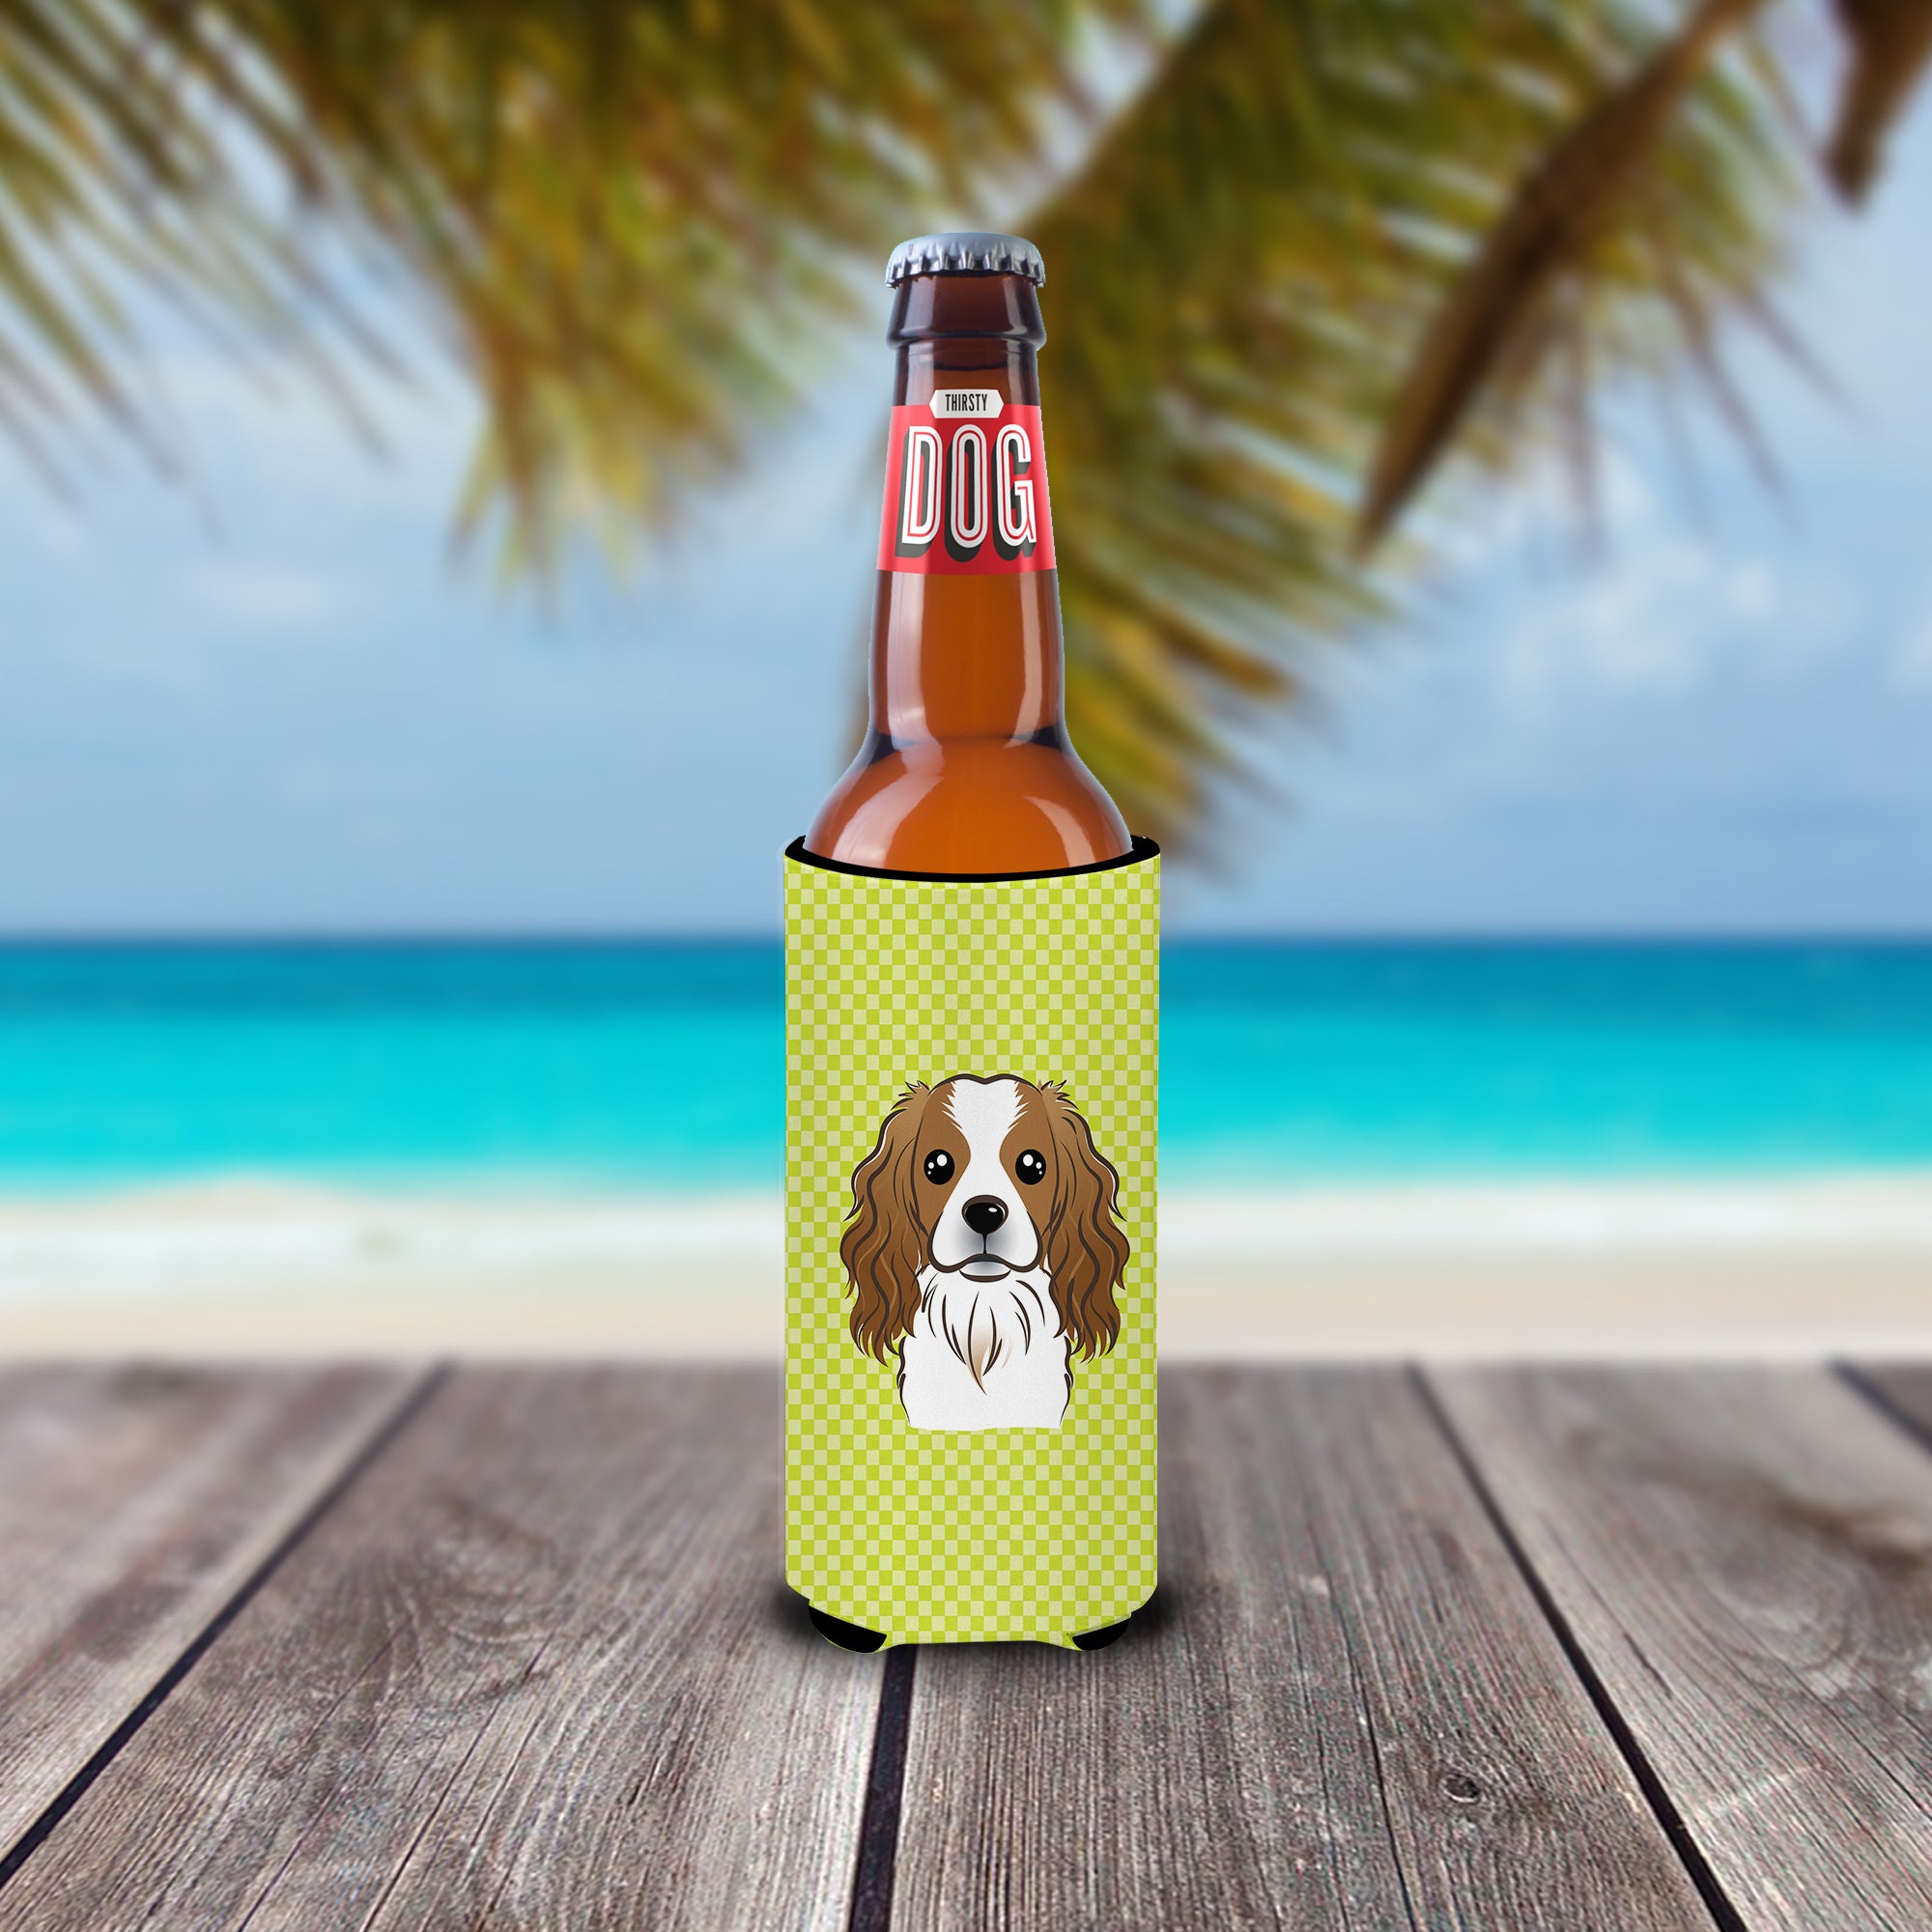 Checkerboard Lime Green Cavalier Spaniel Ultra Beverage Insulators for slim cans